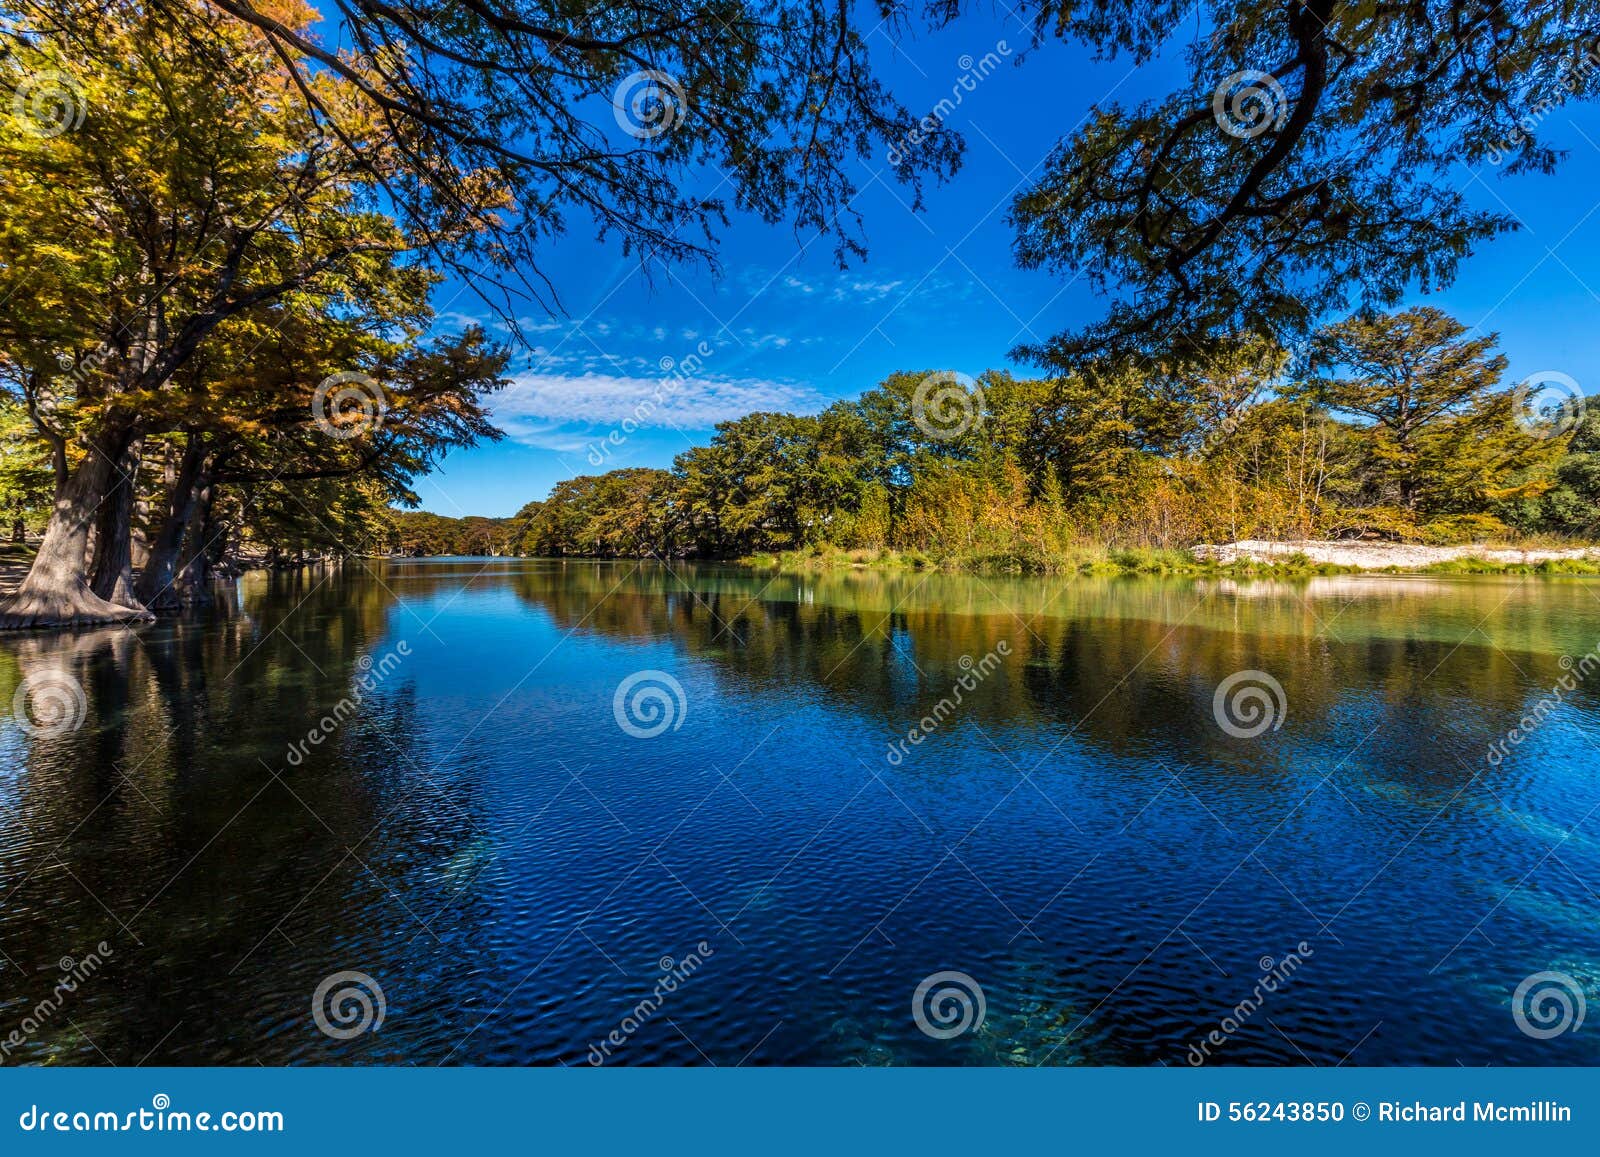 fall foliage on a fall day surrounding the frio river, texas